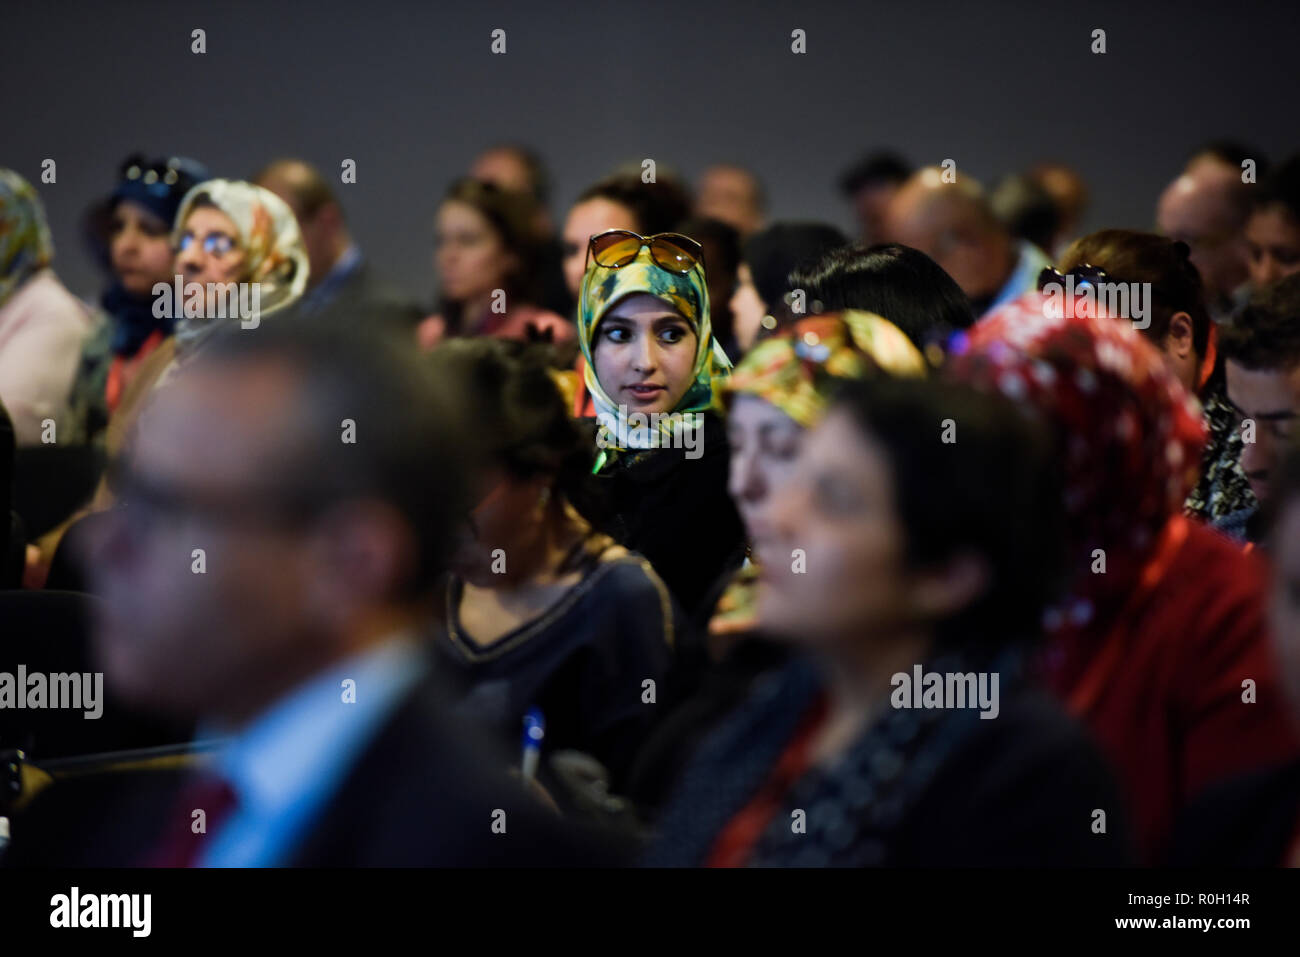 Focus on a North African woman attending the United Nations Climate Change Conference Marrakesh MED COP 2016 conference in Morocco Stock Photo